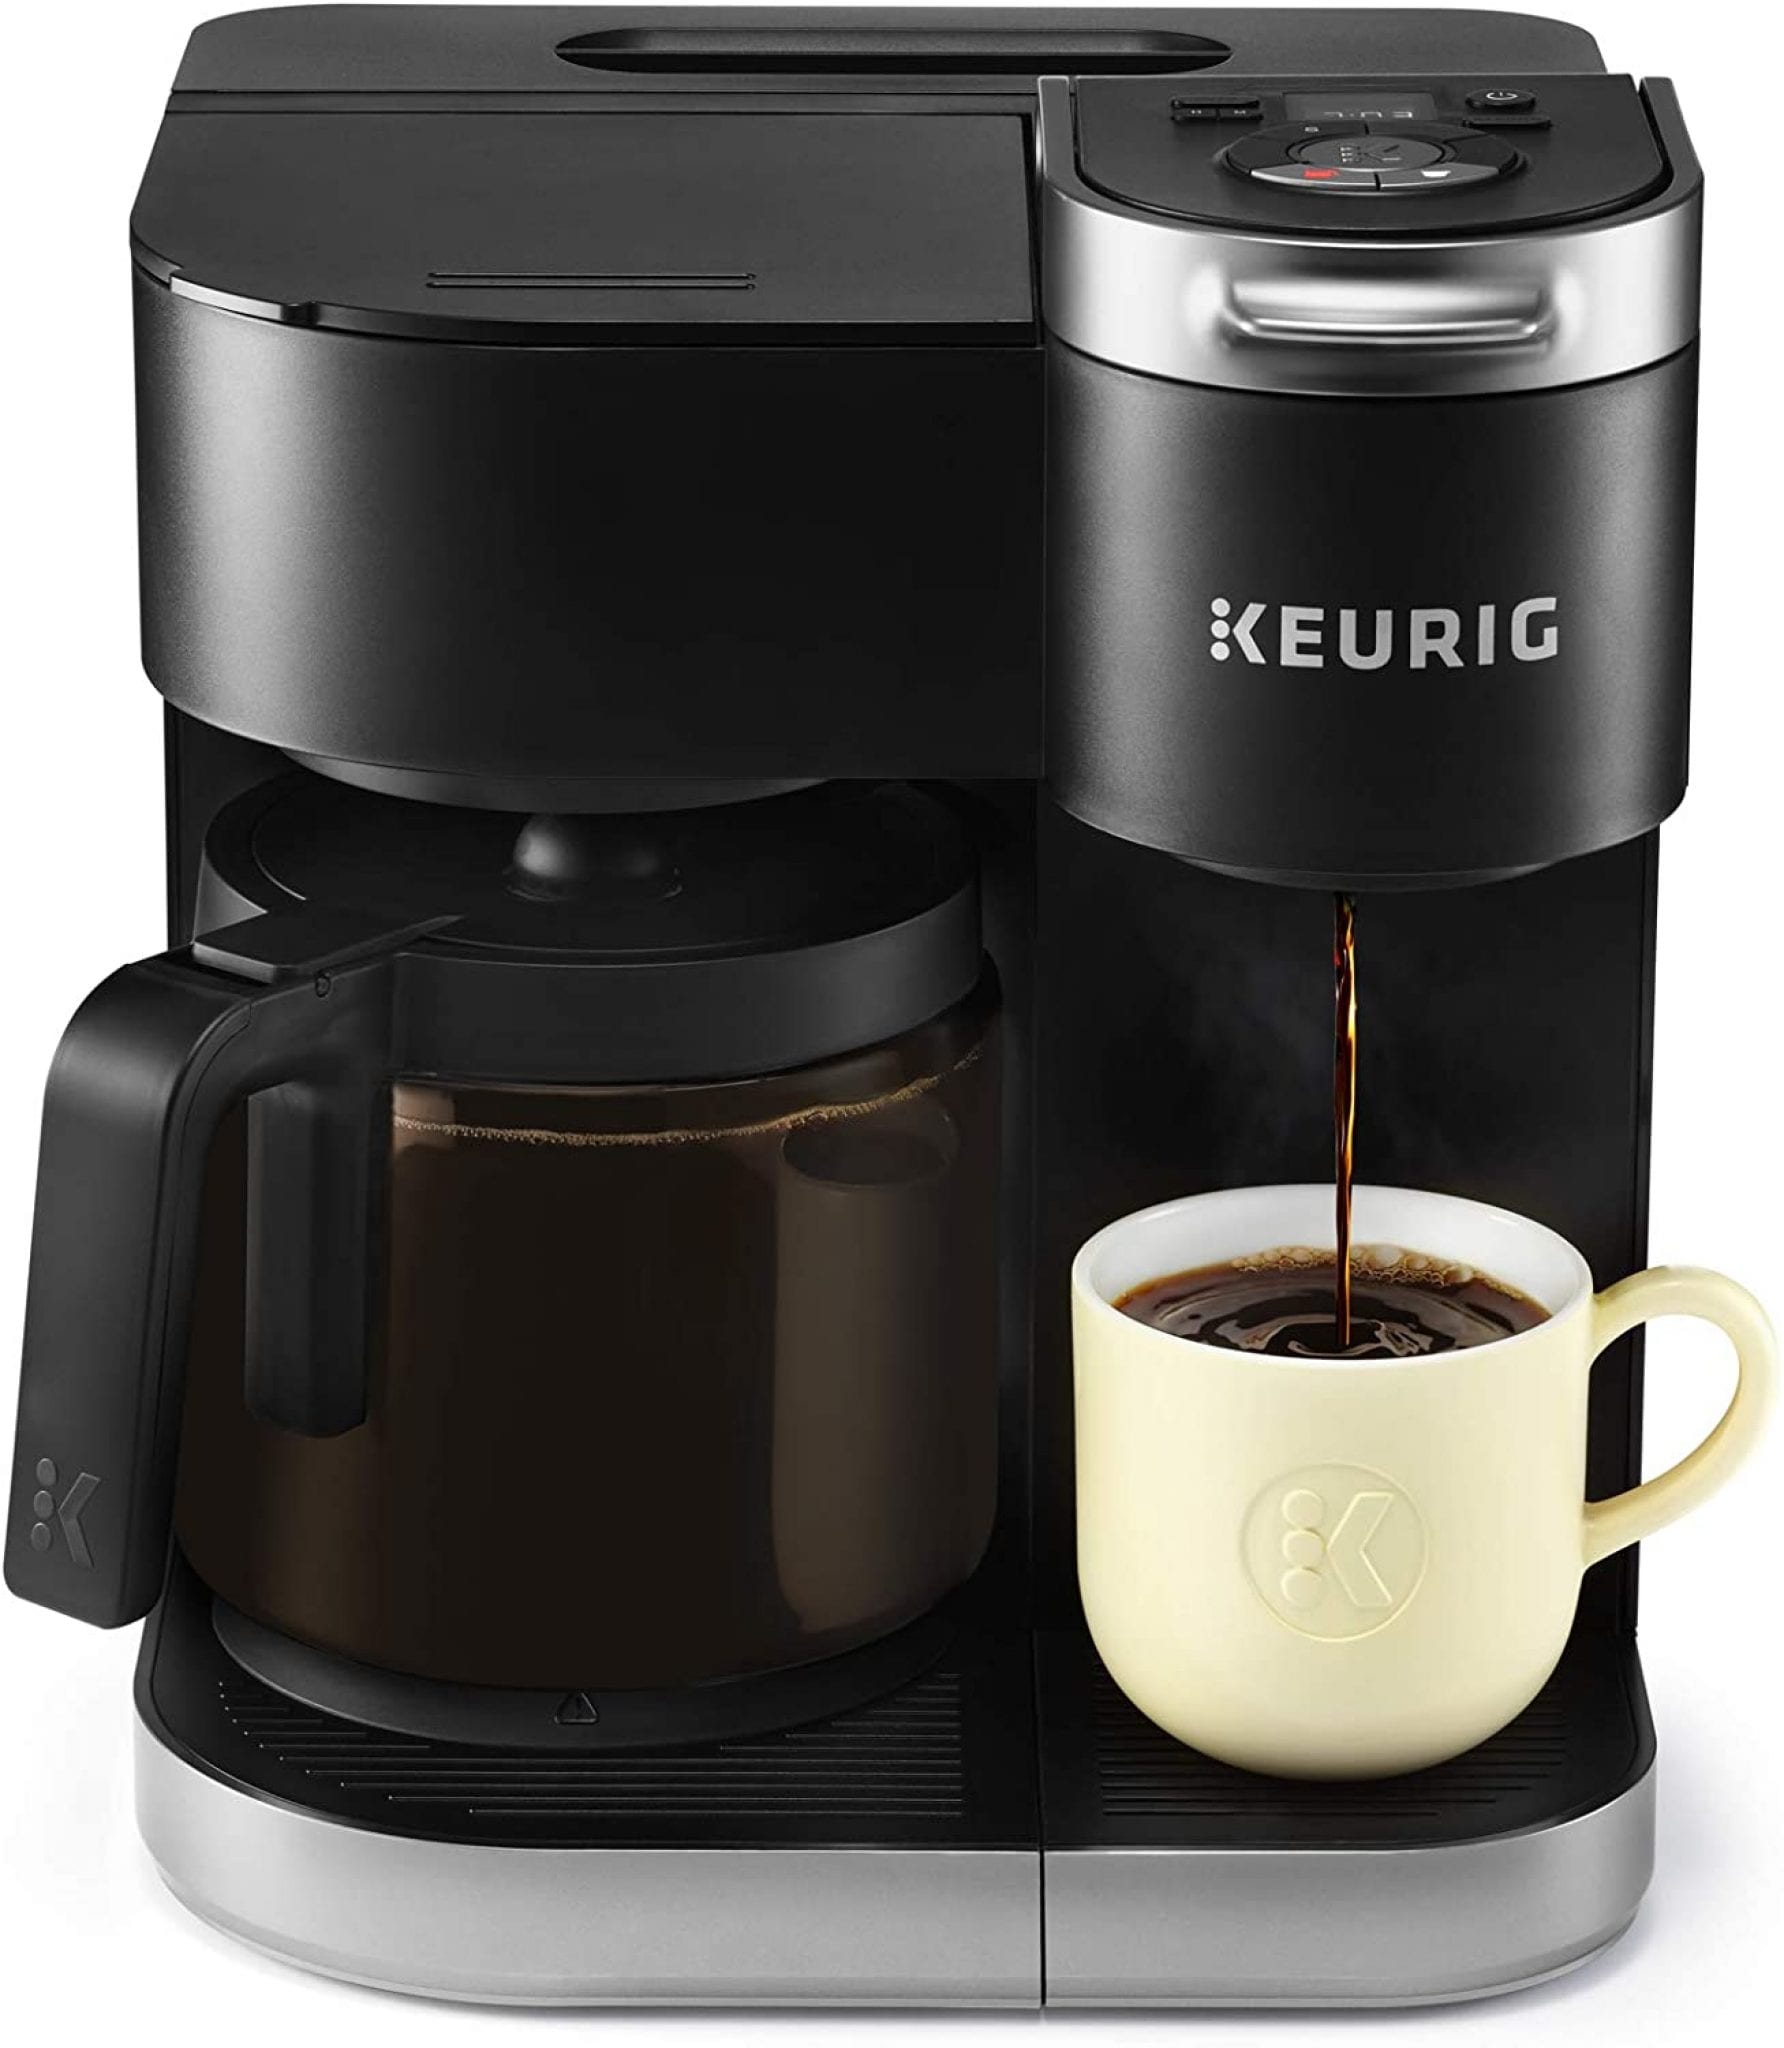 Keurig KDuo Coffee Maker Pre Prime Day Deal at Amazon! Glitchndealz